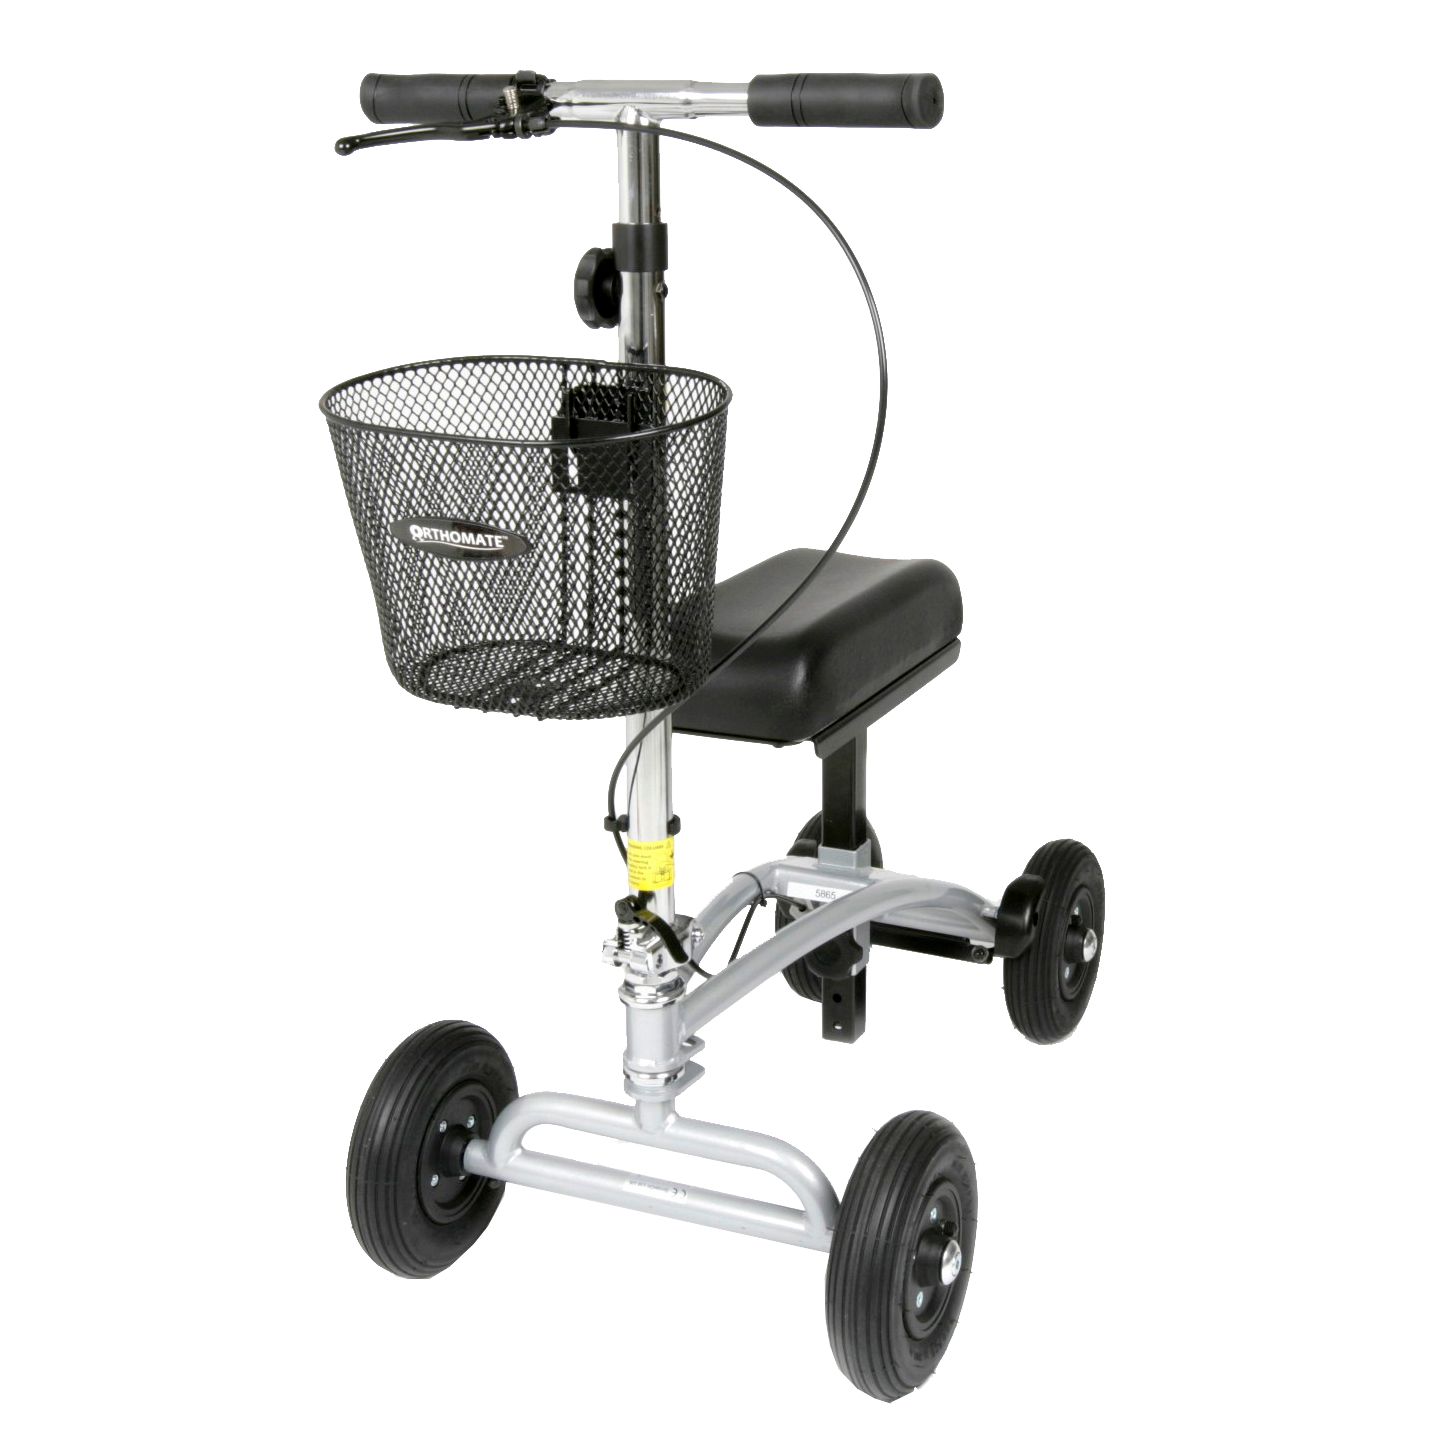 Orthomate Knee Scooter features 